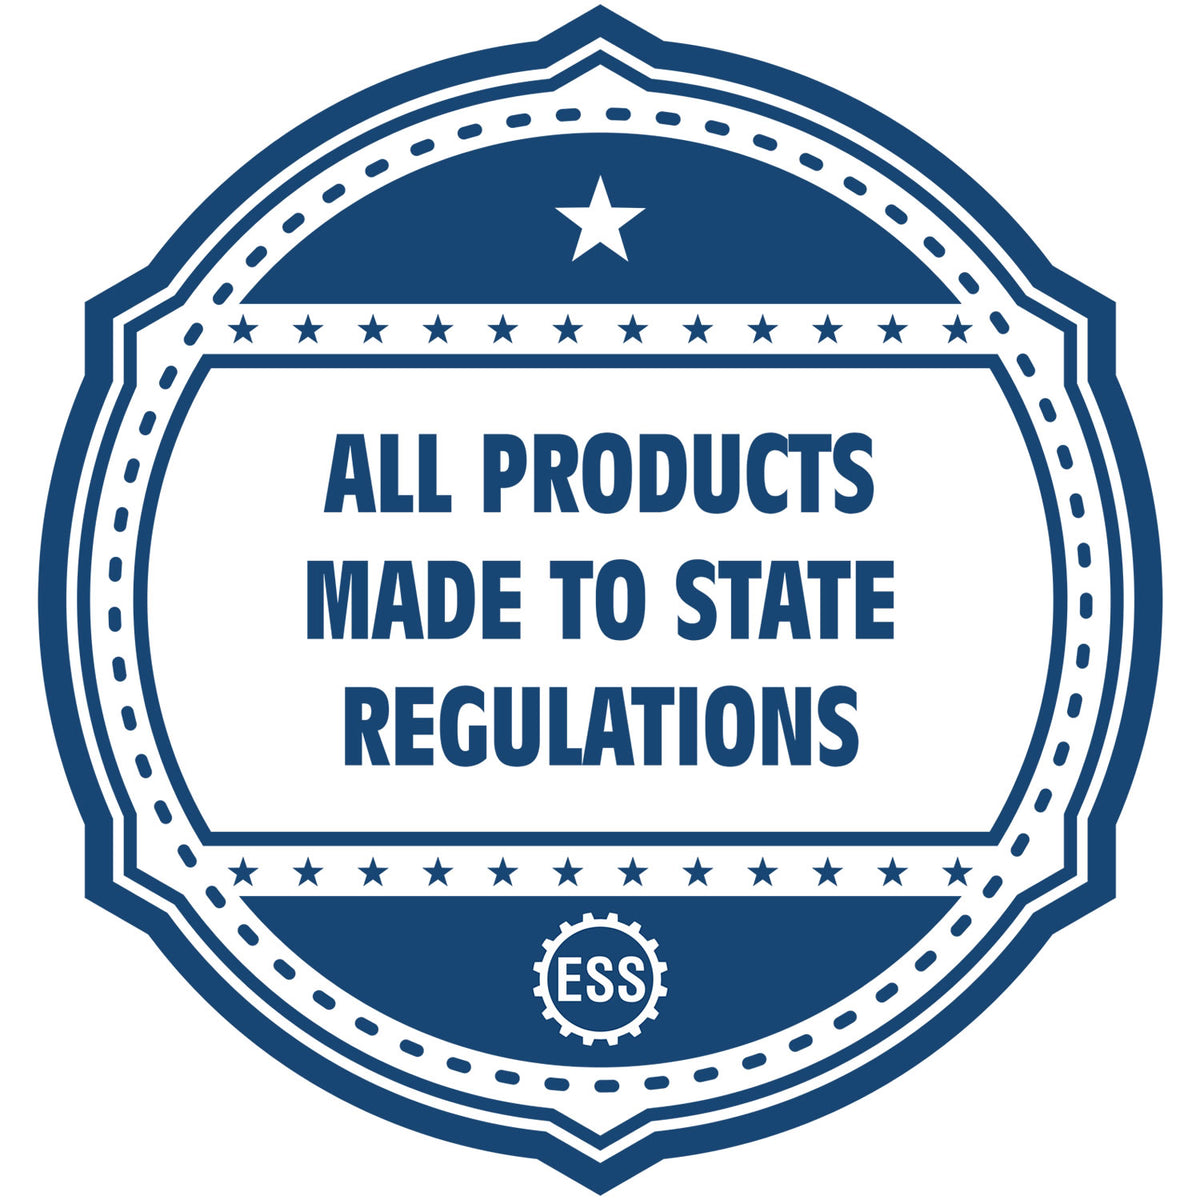 An icon or badge element for the Slim Pre-Inked Illinois Architect Seal Stamp showing that this product is made in compliance with state regulations.